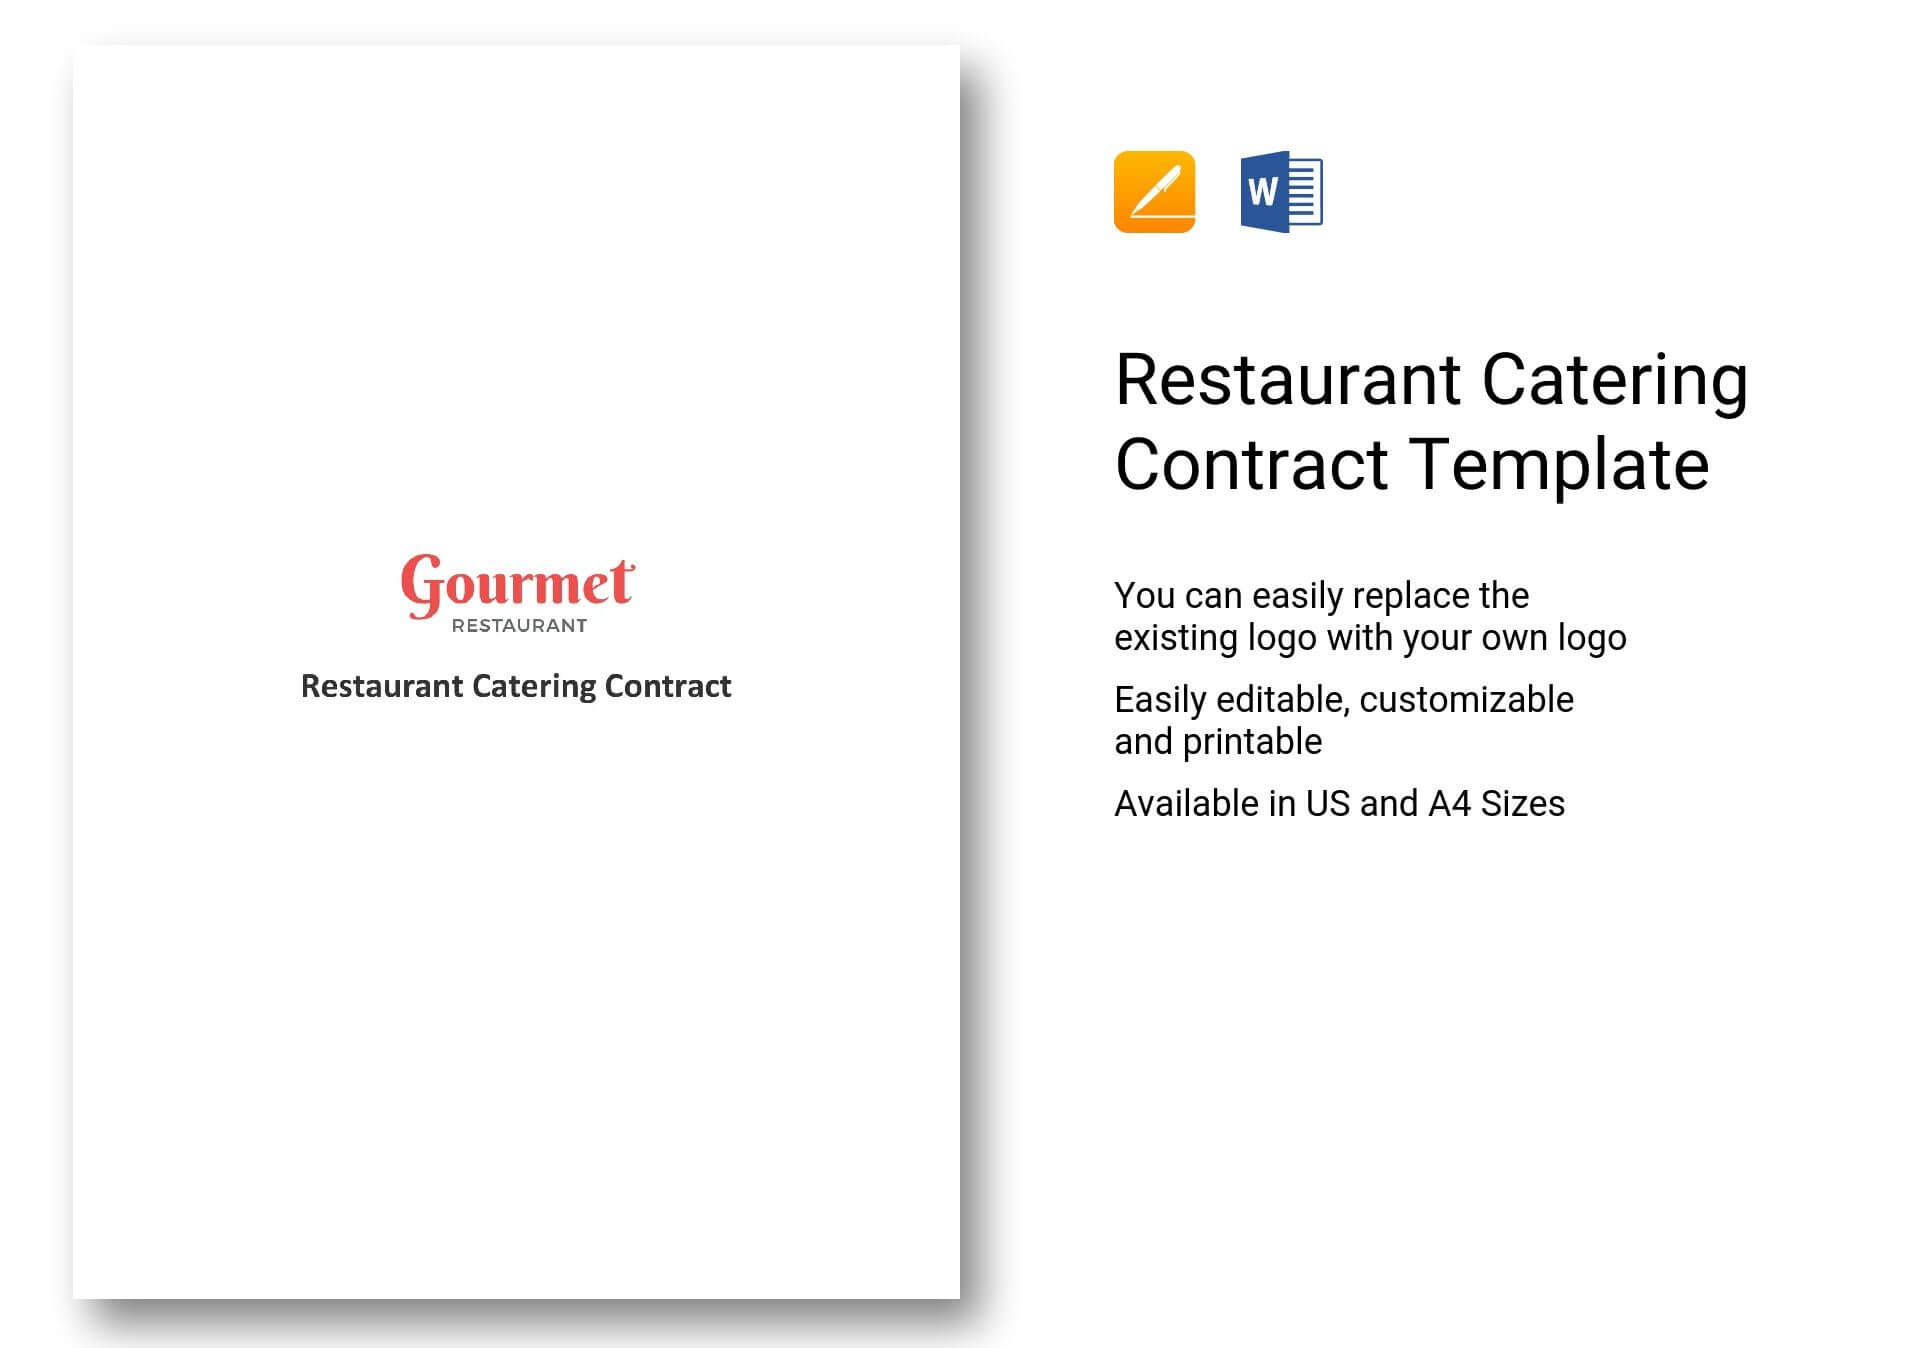 Restaurant Catering Contract Template In Word, Apple Pages For Catering Contract Template Word